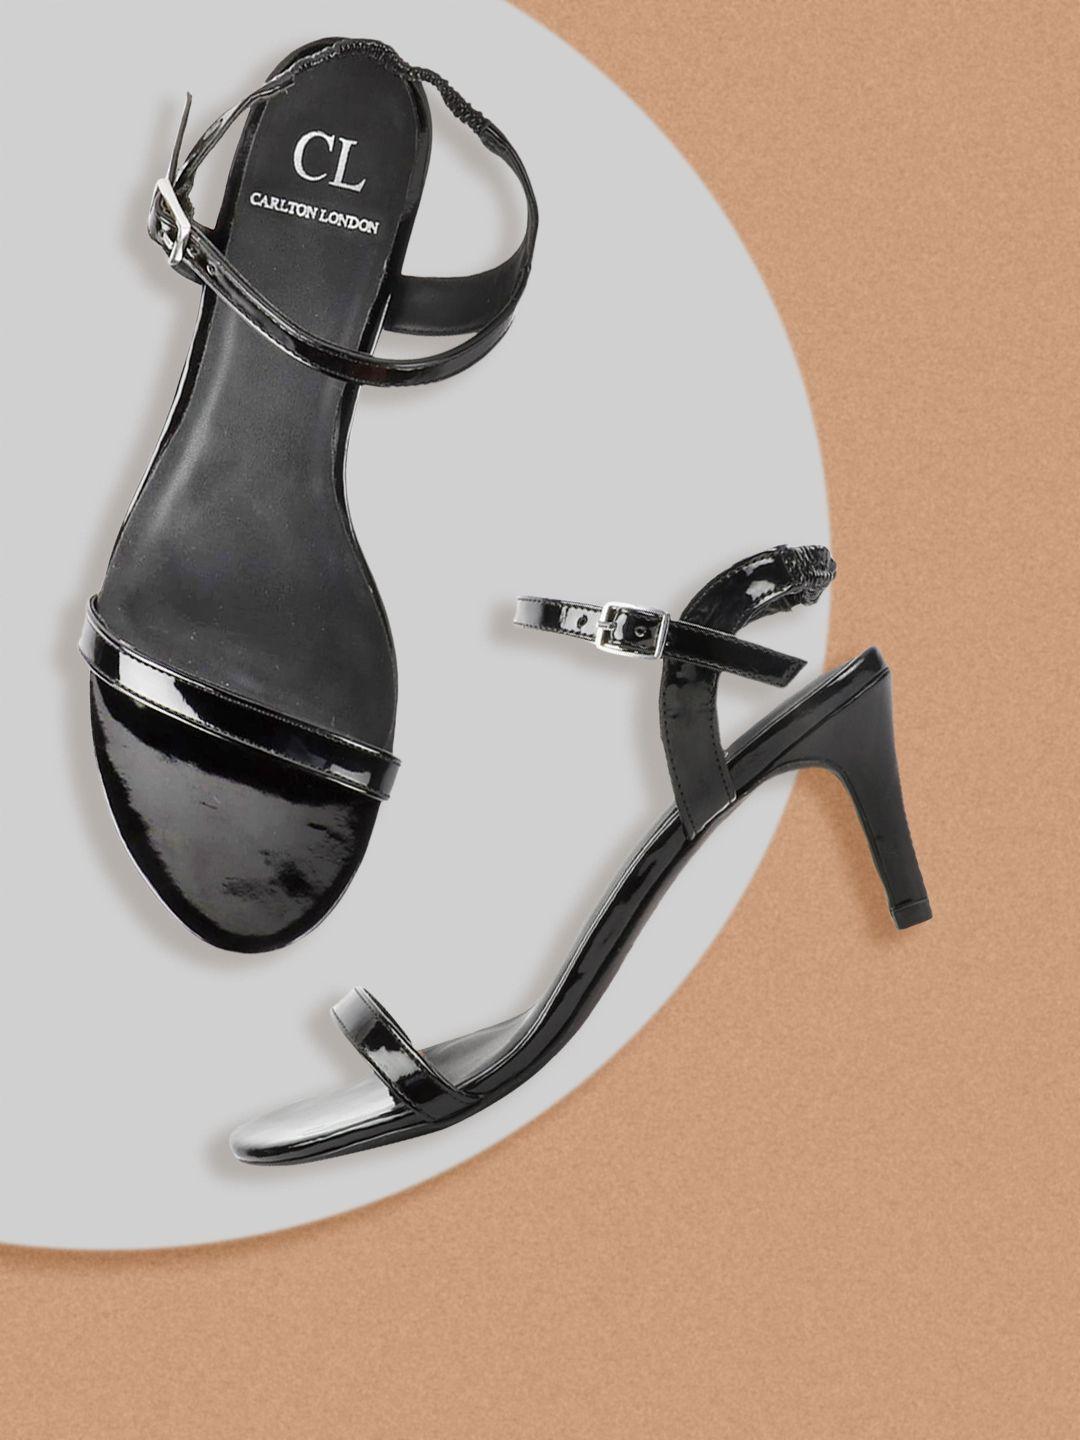 carlton-london-black-sandals-with-buckles